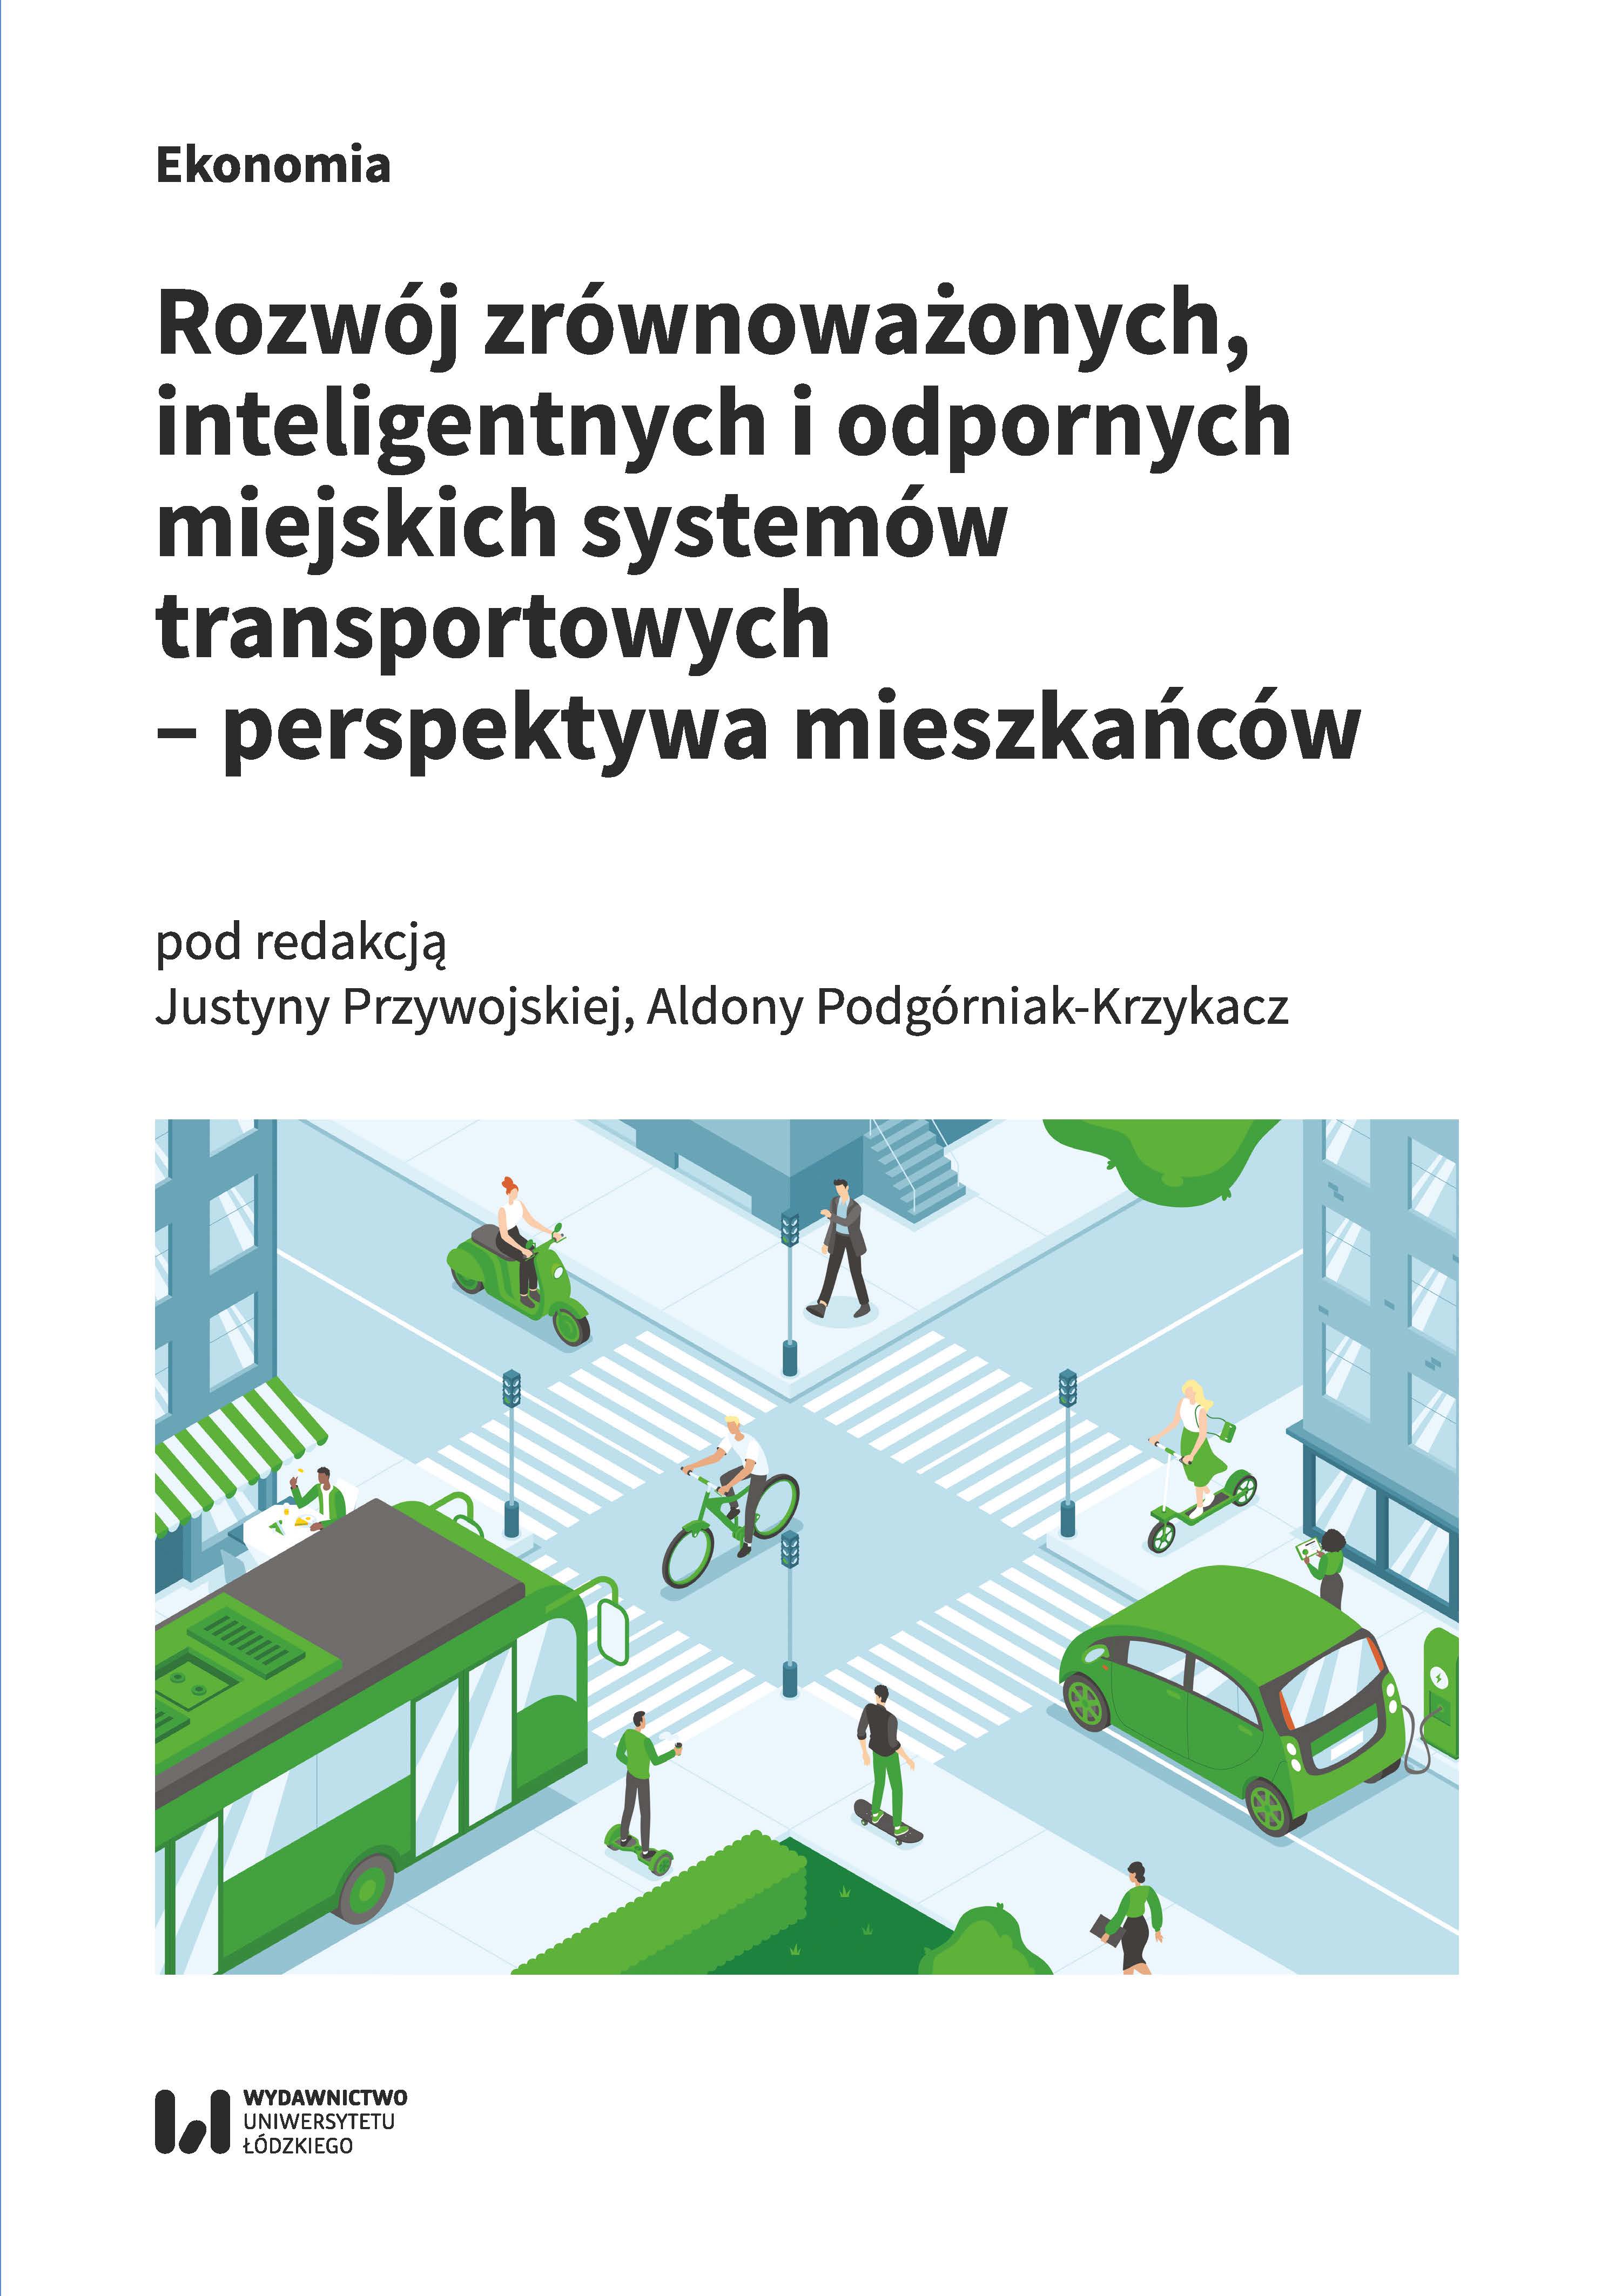 Intelligent Transport Systems - possibilities and effects of their application in cities - example of Lodz Cover Image